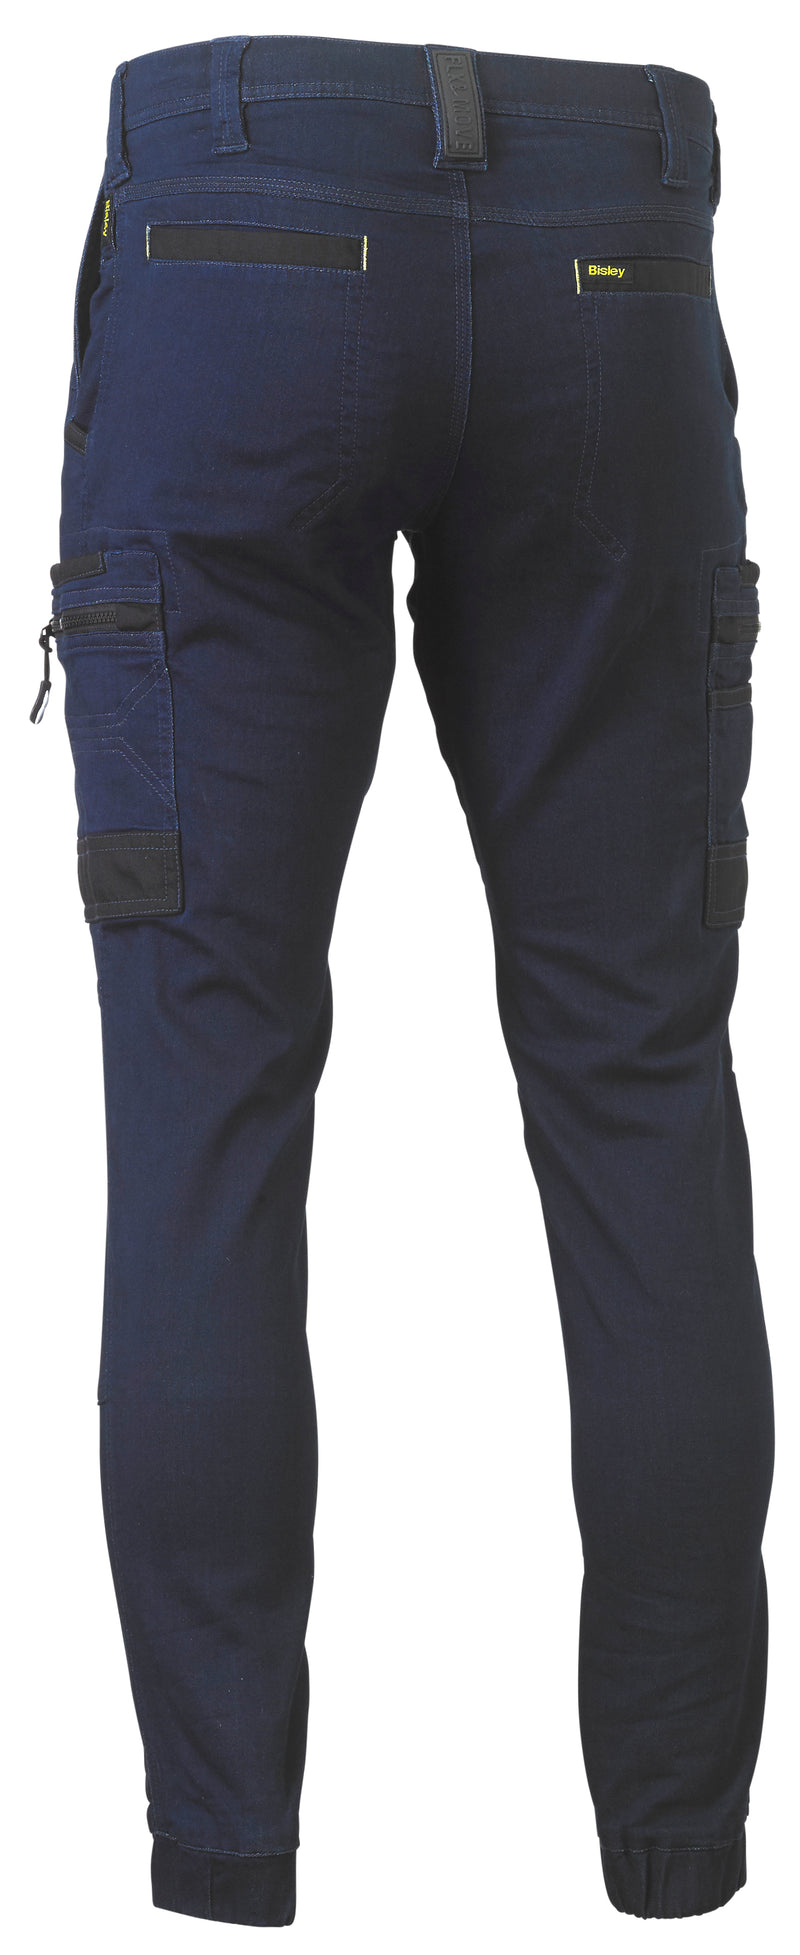 Load image into Gallery viewer, Wholesale BPC6334 Bisley Flex And Move™ Stretch Cargo Cuffed Pants - Regular Printed or Blank
